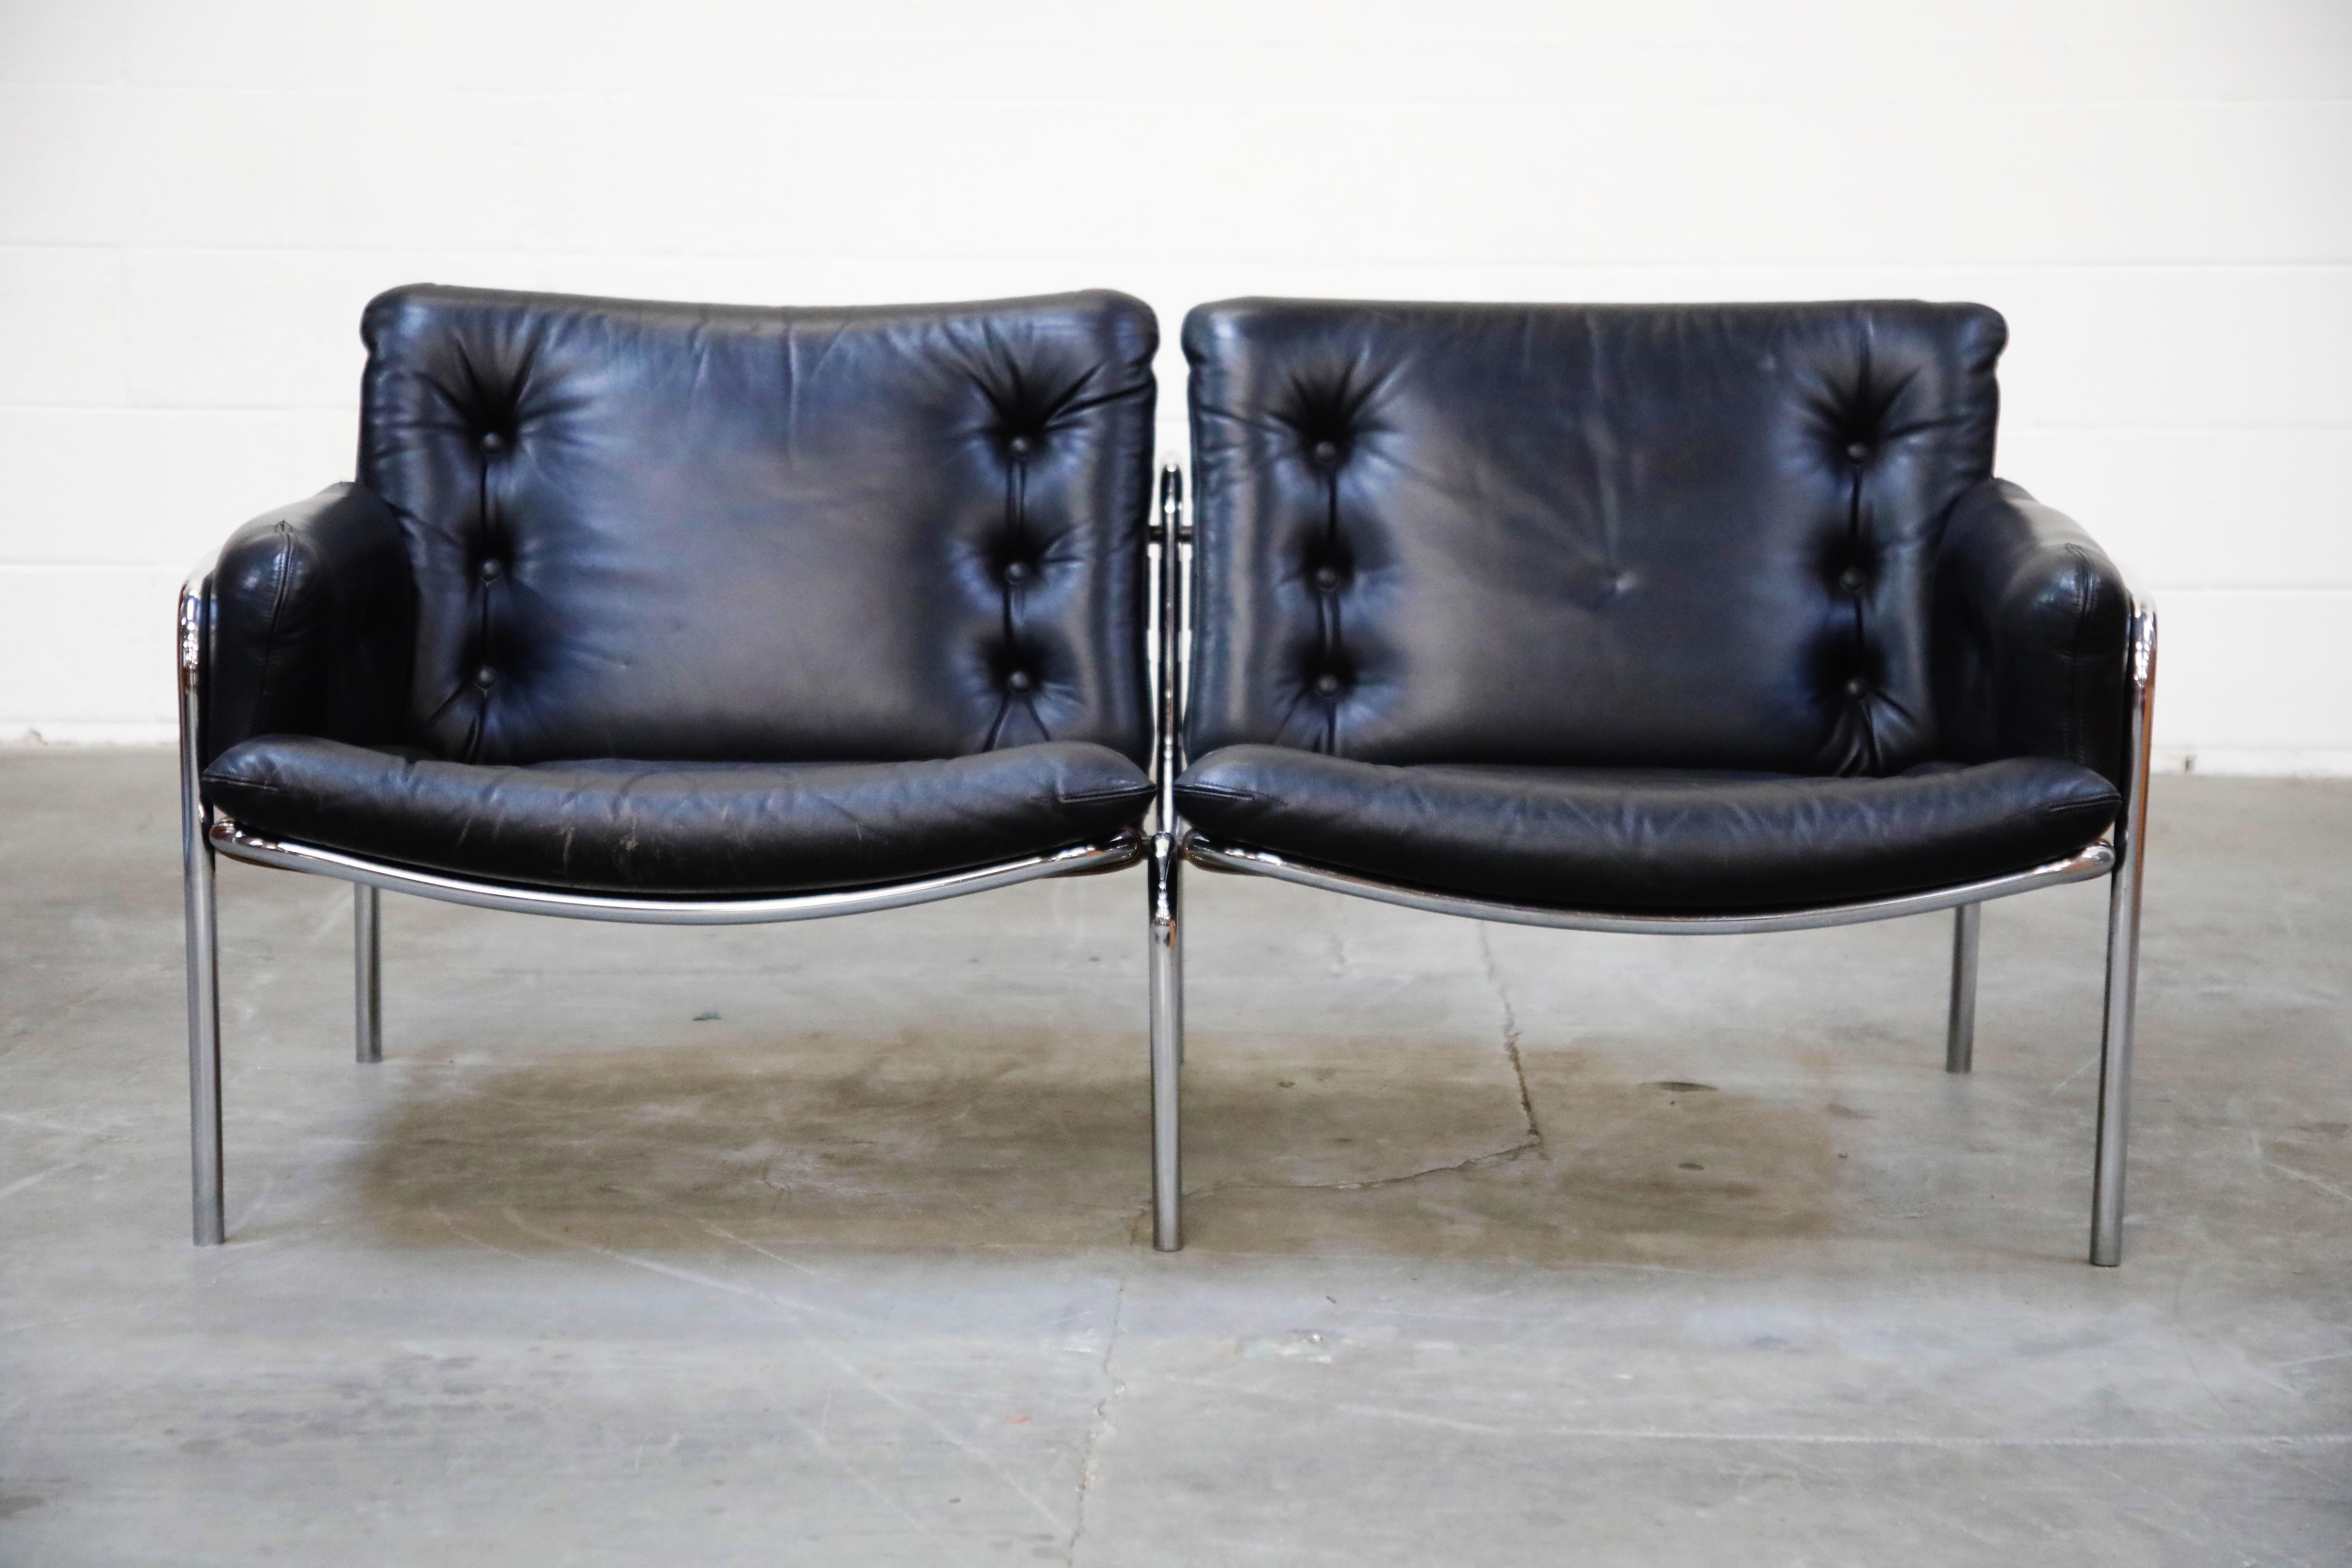 Designed in 1969, this black leather and chrome frame 'Osaka' two-seat sofa settee by Martin Visser for 't Spectrum Bergeijk, was showed at the 1972 World Fair in Kyoto, Japan. This design was only produced for a short period of time, making this